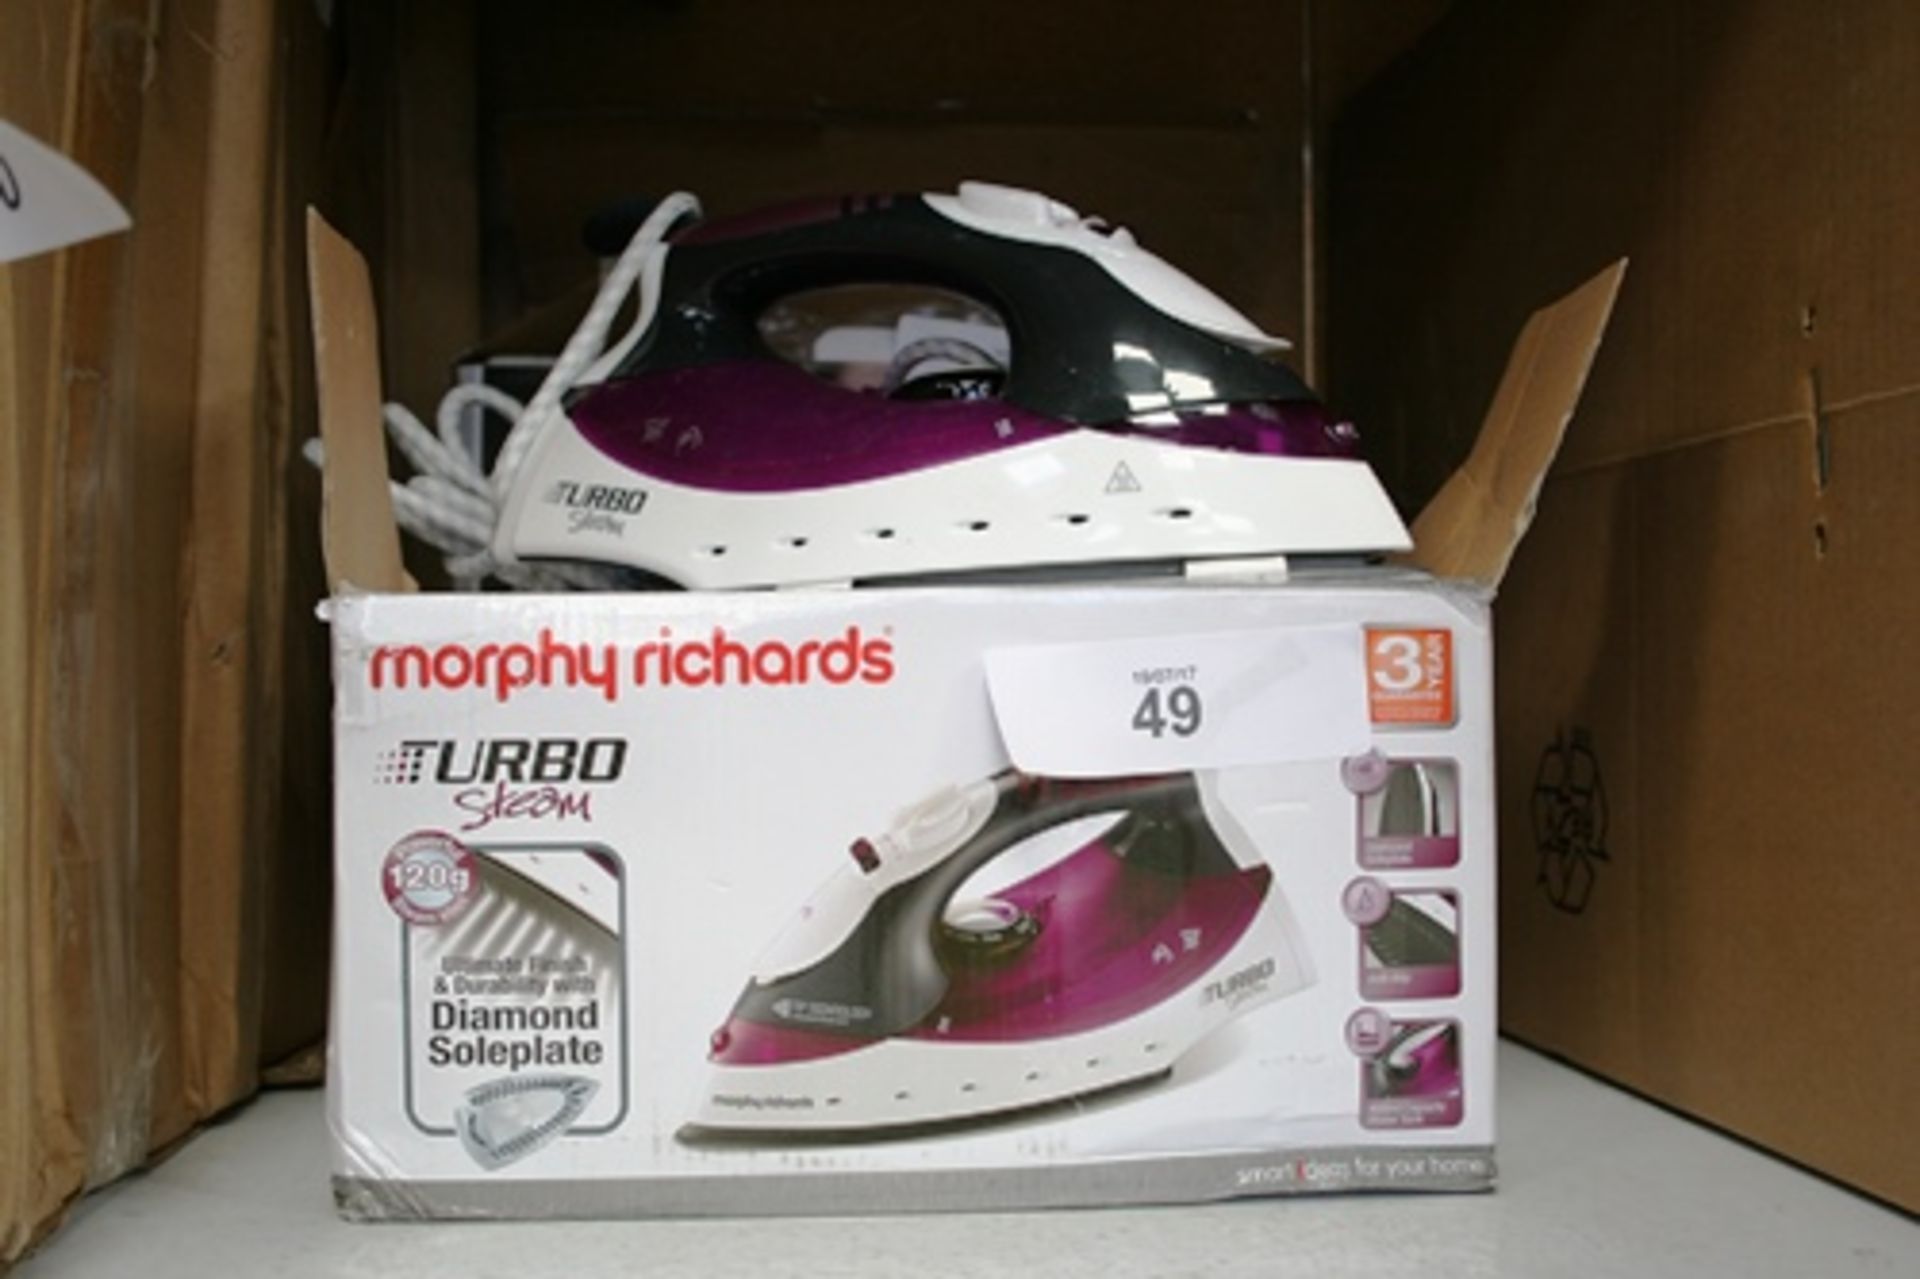 2 x Morphy Richards turbo steam irons, one missing box together with Bosch Sensixx B1 and Quest